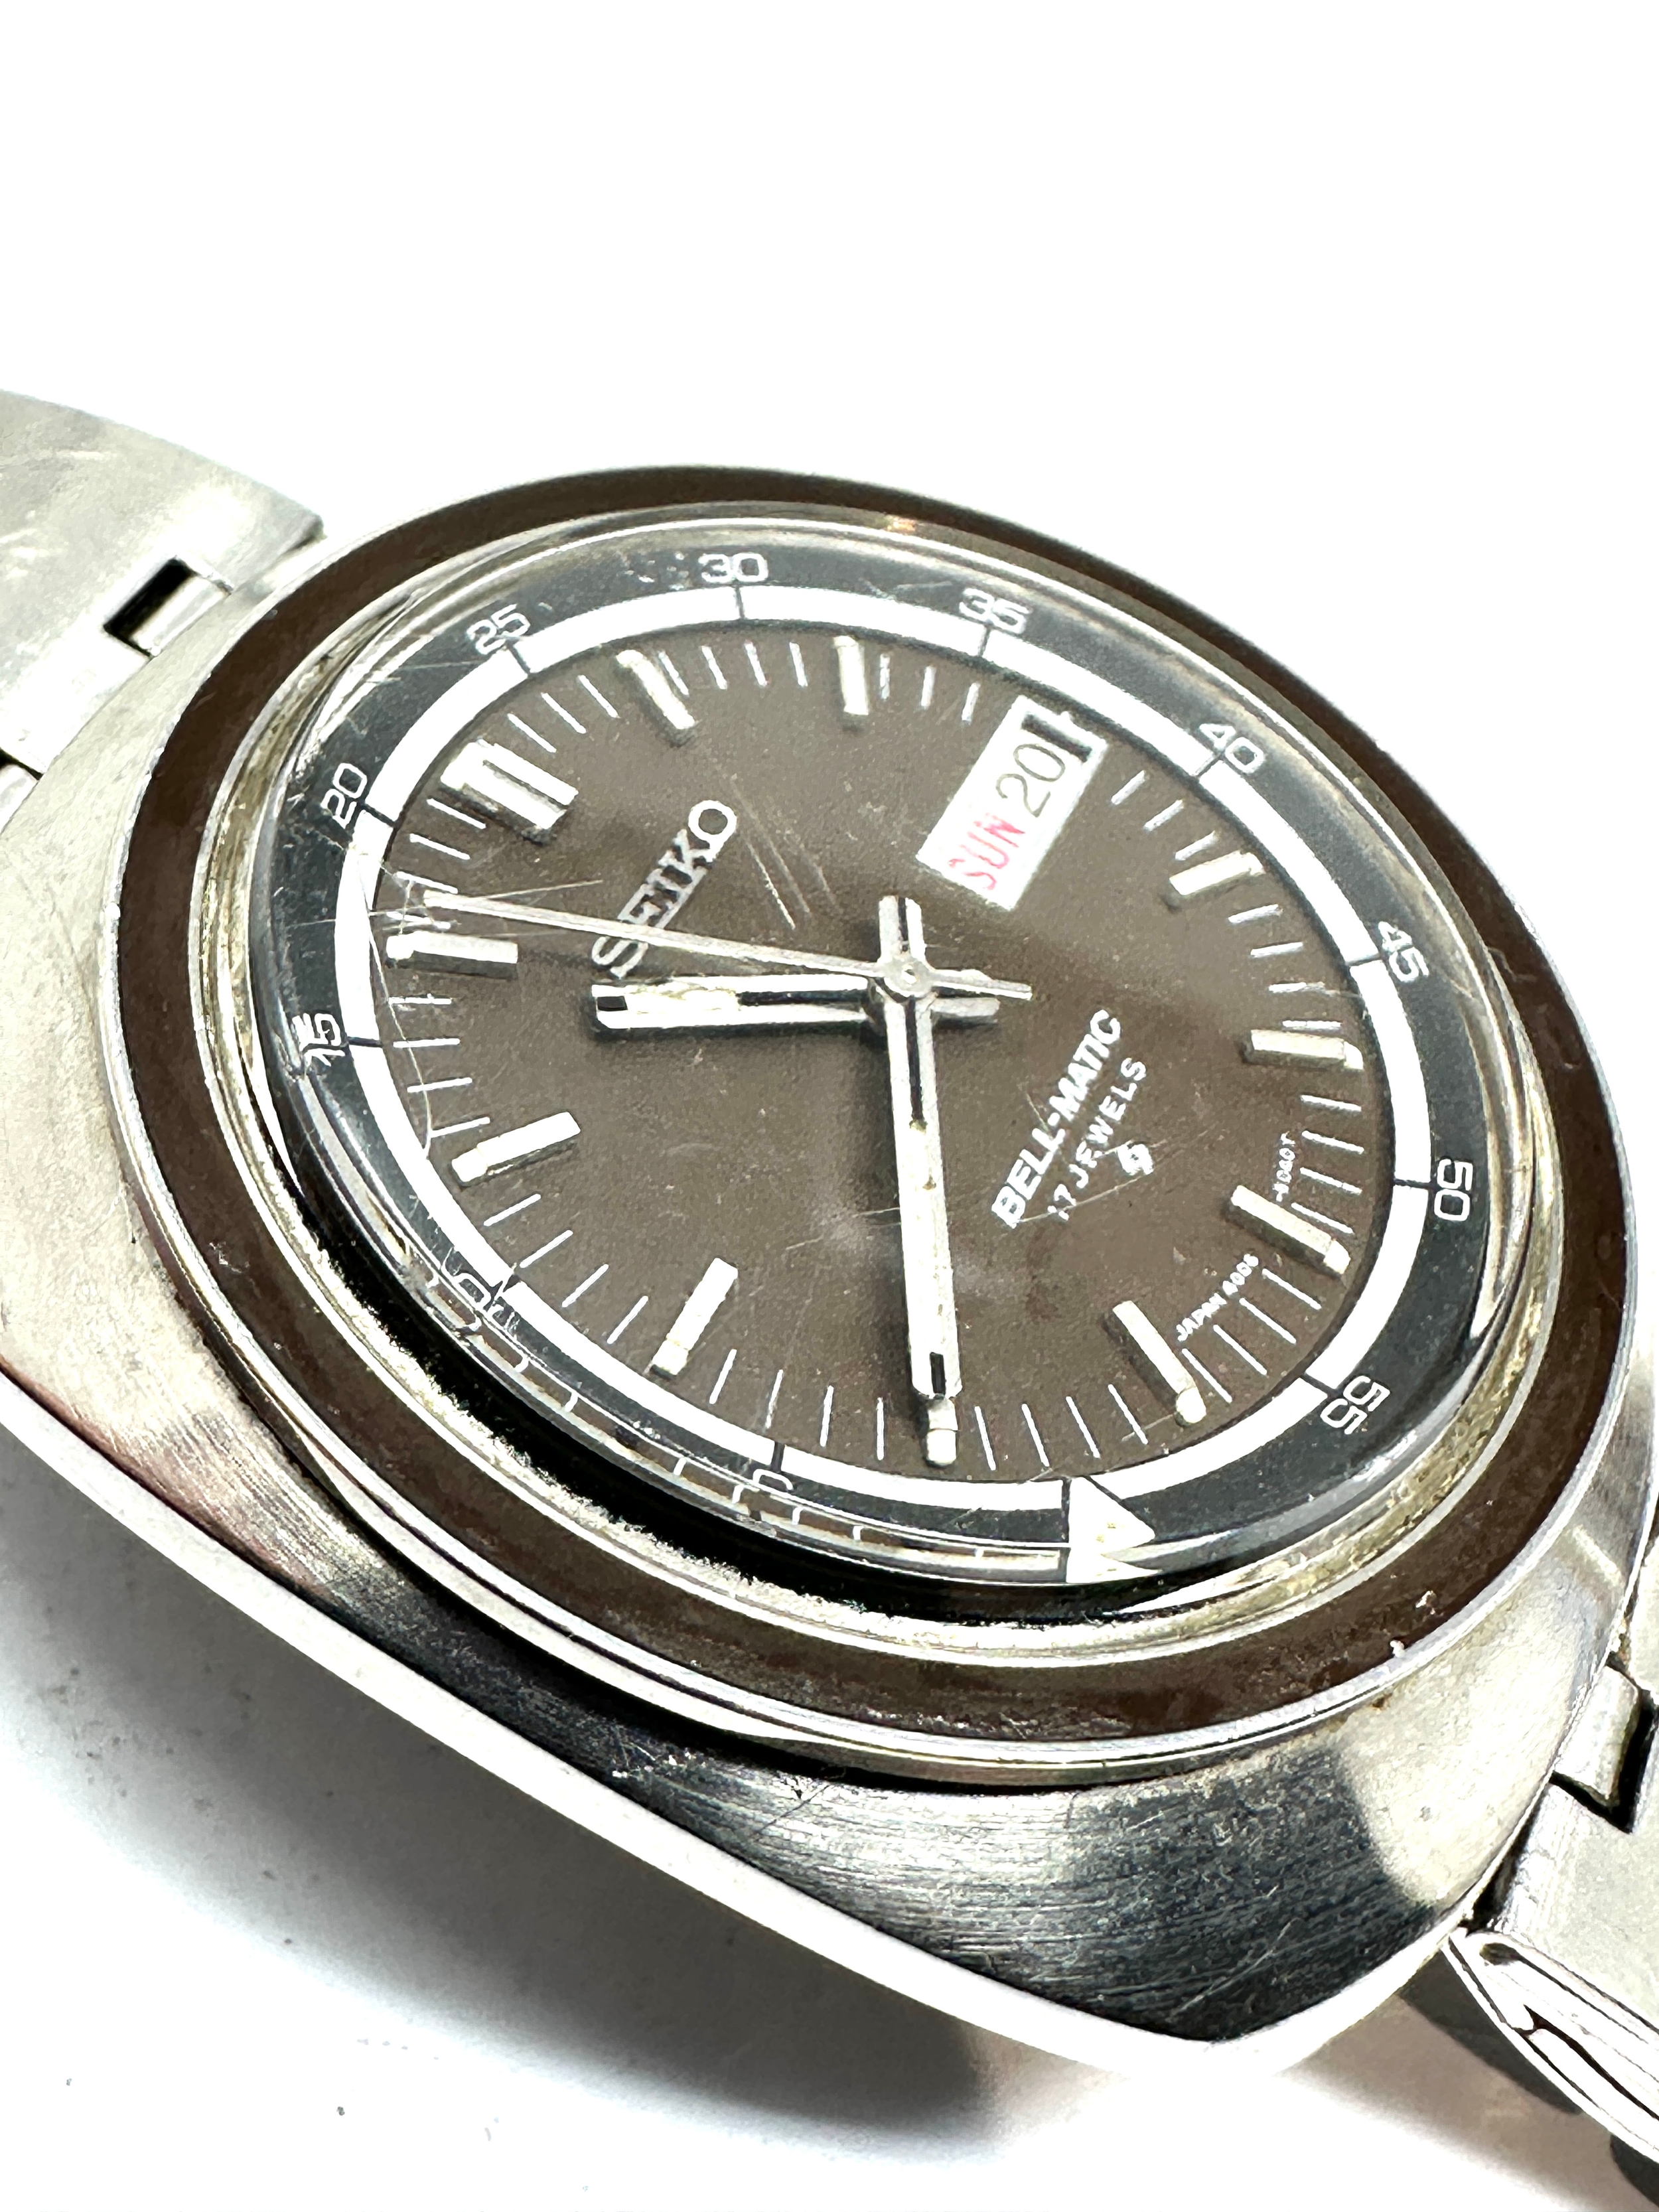 Vintage gents seiko bell-matic wristwatch 4006-6020 the watch is ticking - Image 3 of 5